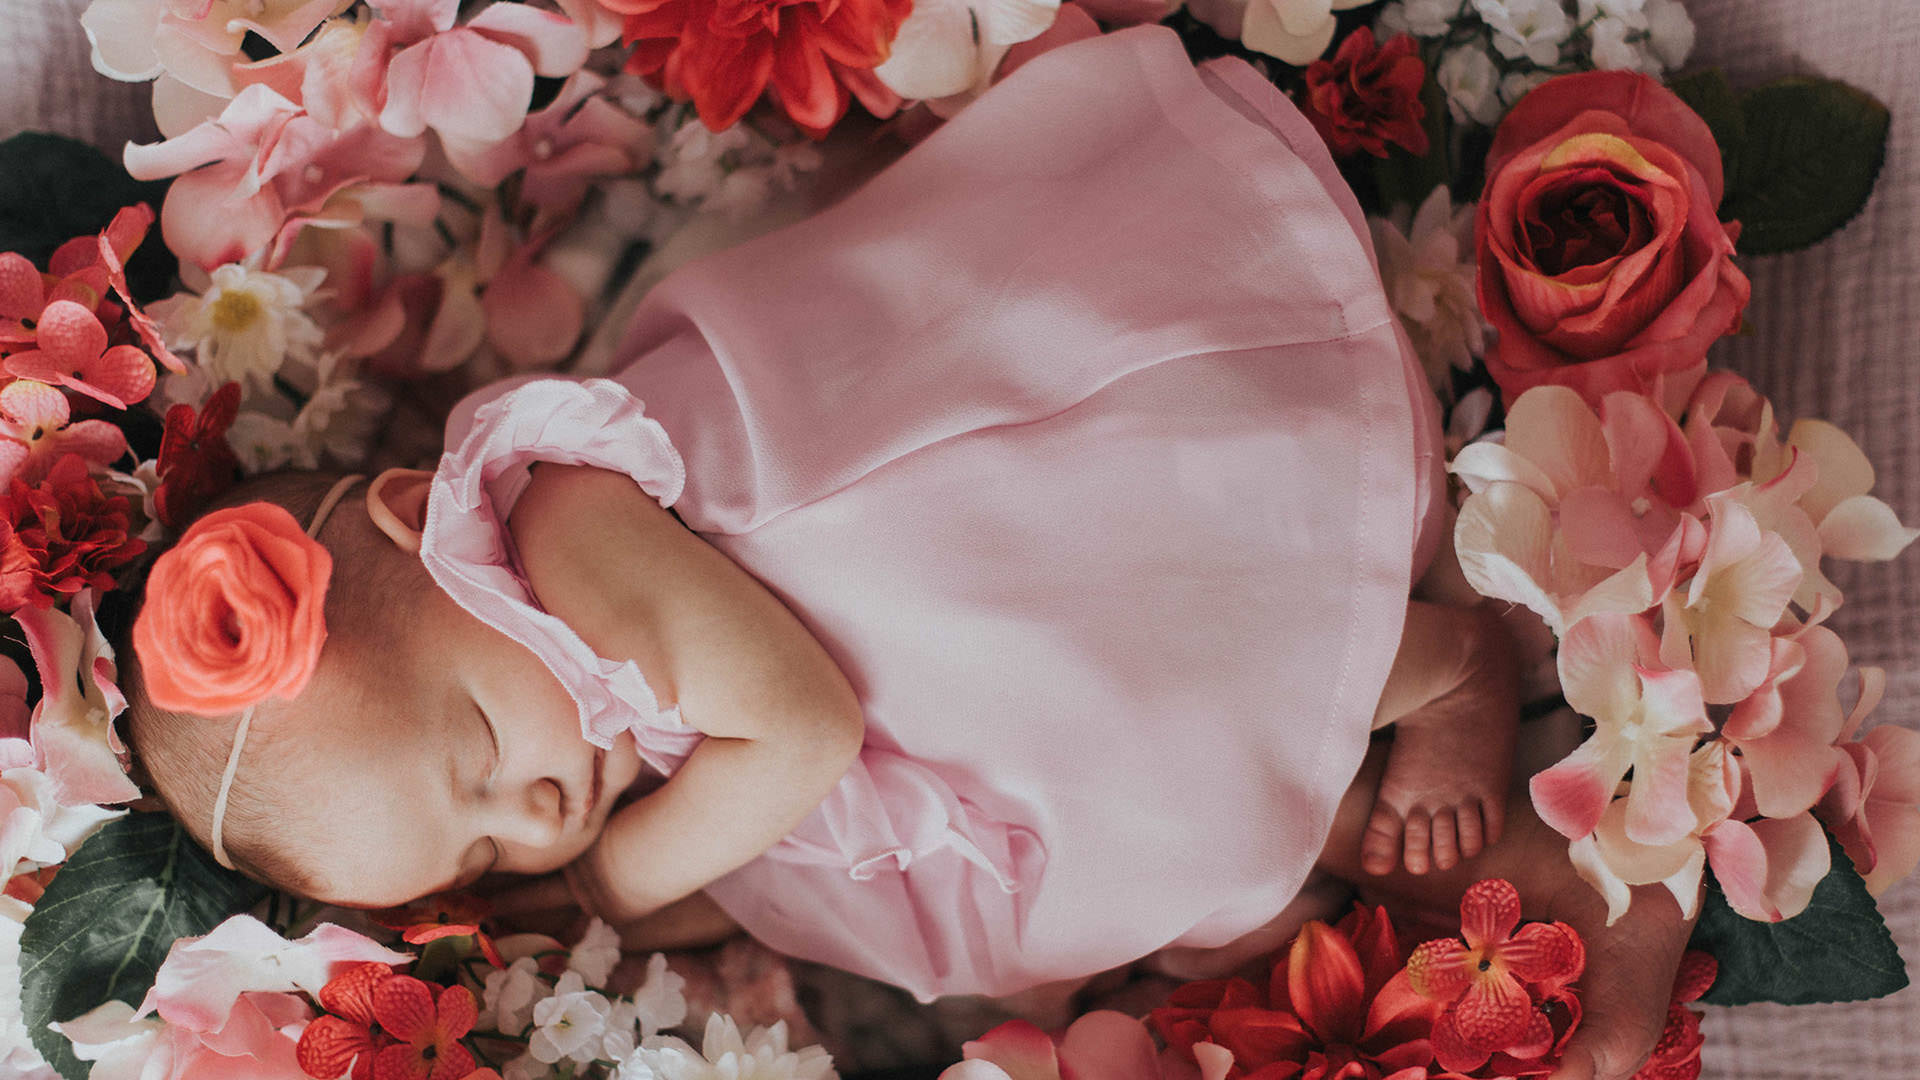 Baby lying in a bed of flowers during a newborn photography session in Greenville,SC.